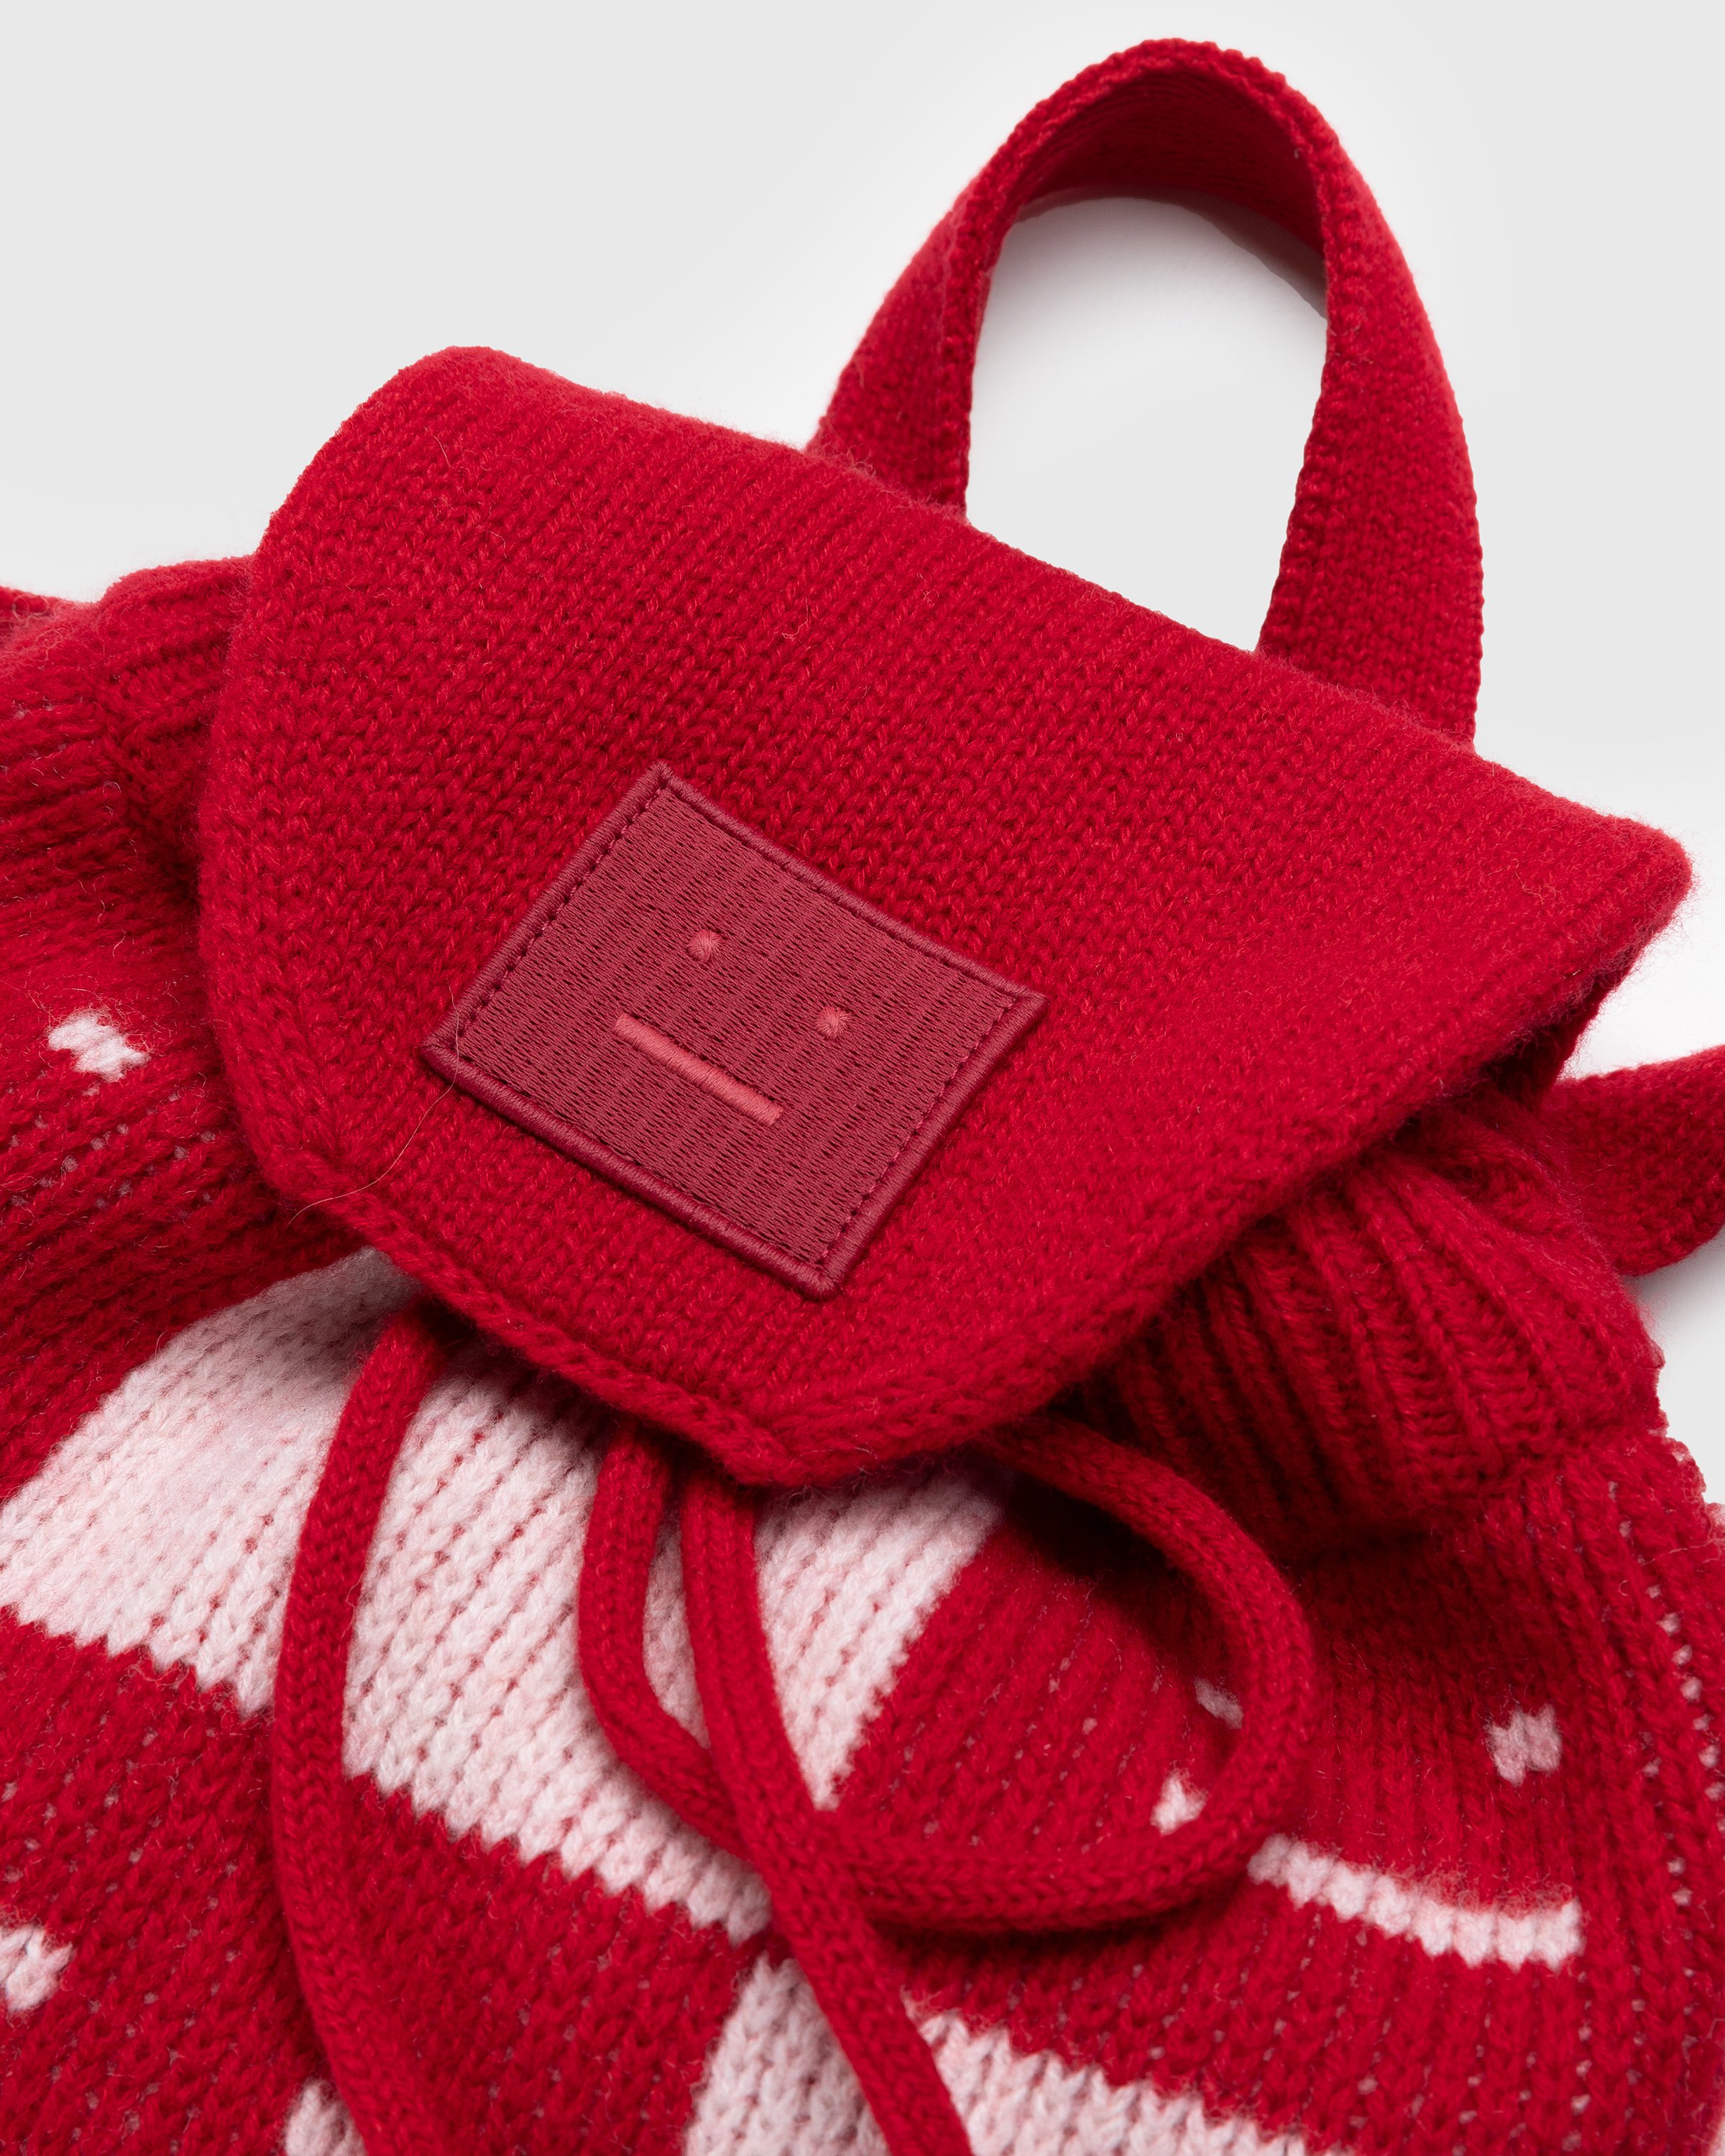 Acne Studios - Knit Face Backpack Deep Red/Faded Pink/Melange - Accessories - Red - Image 3